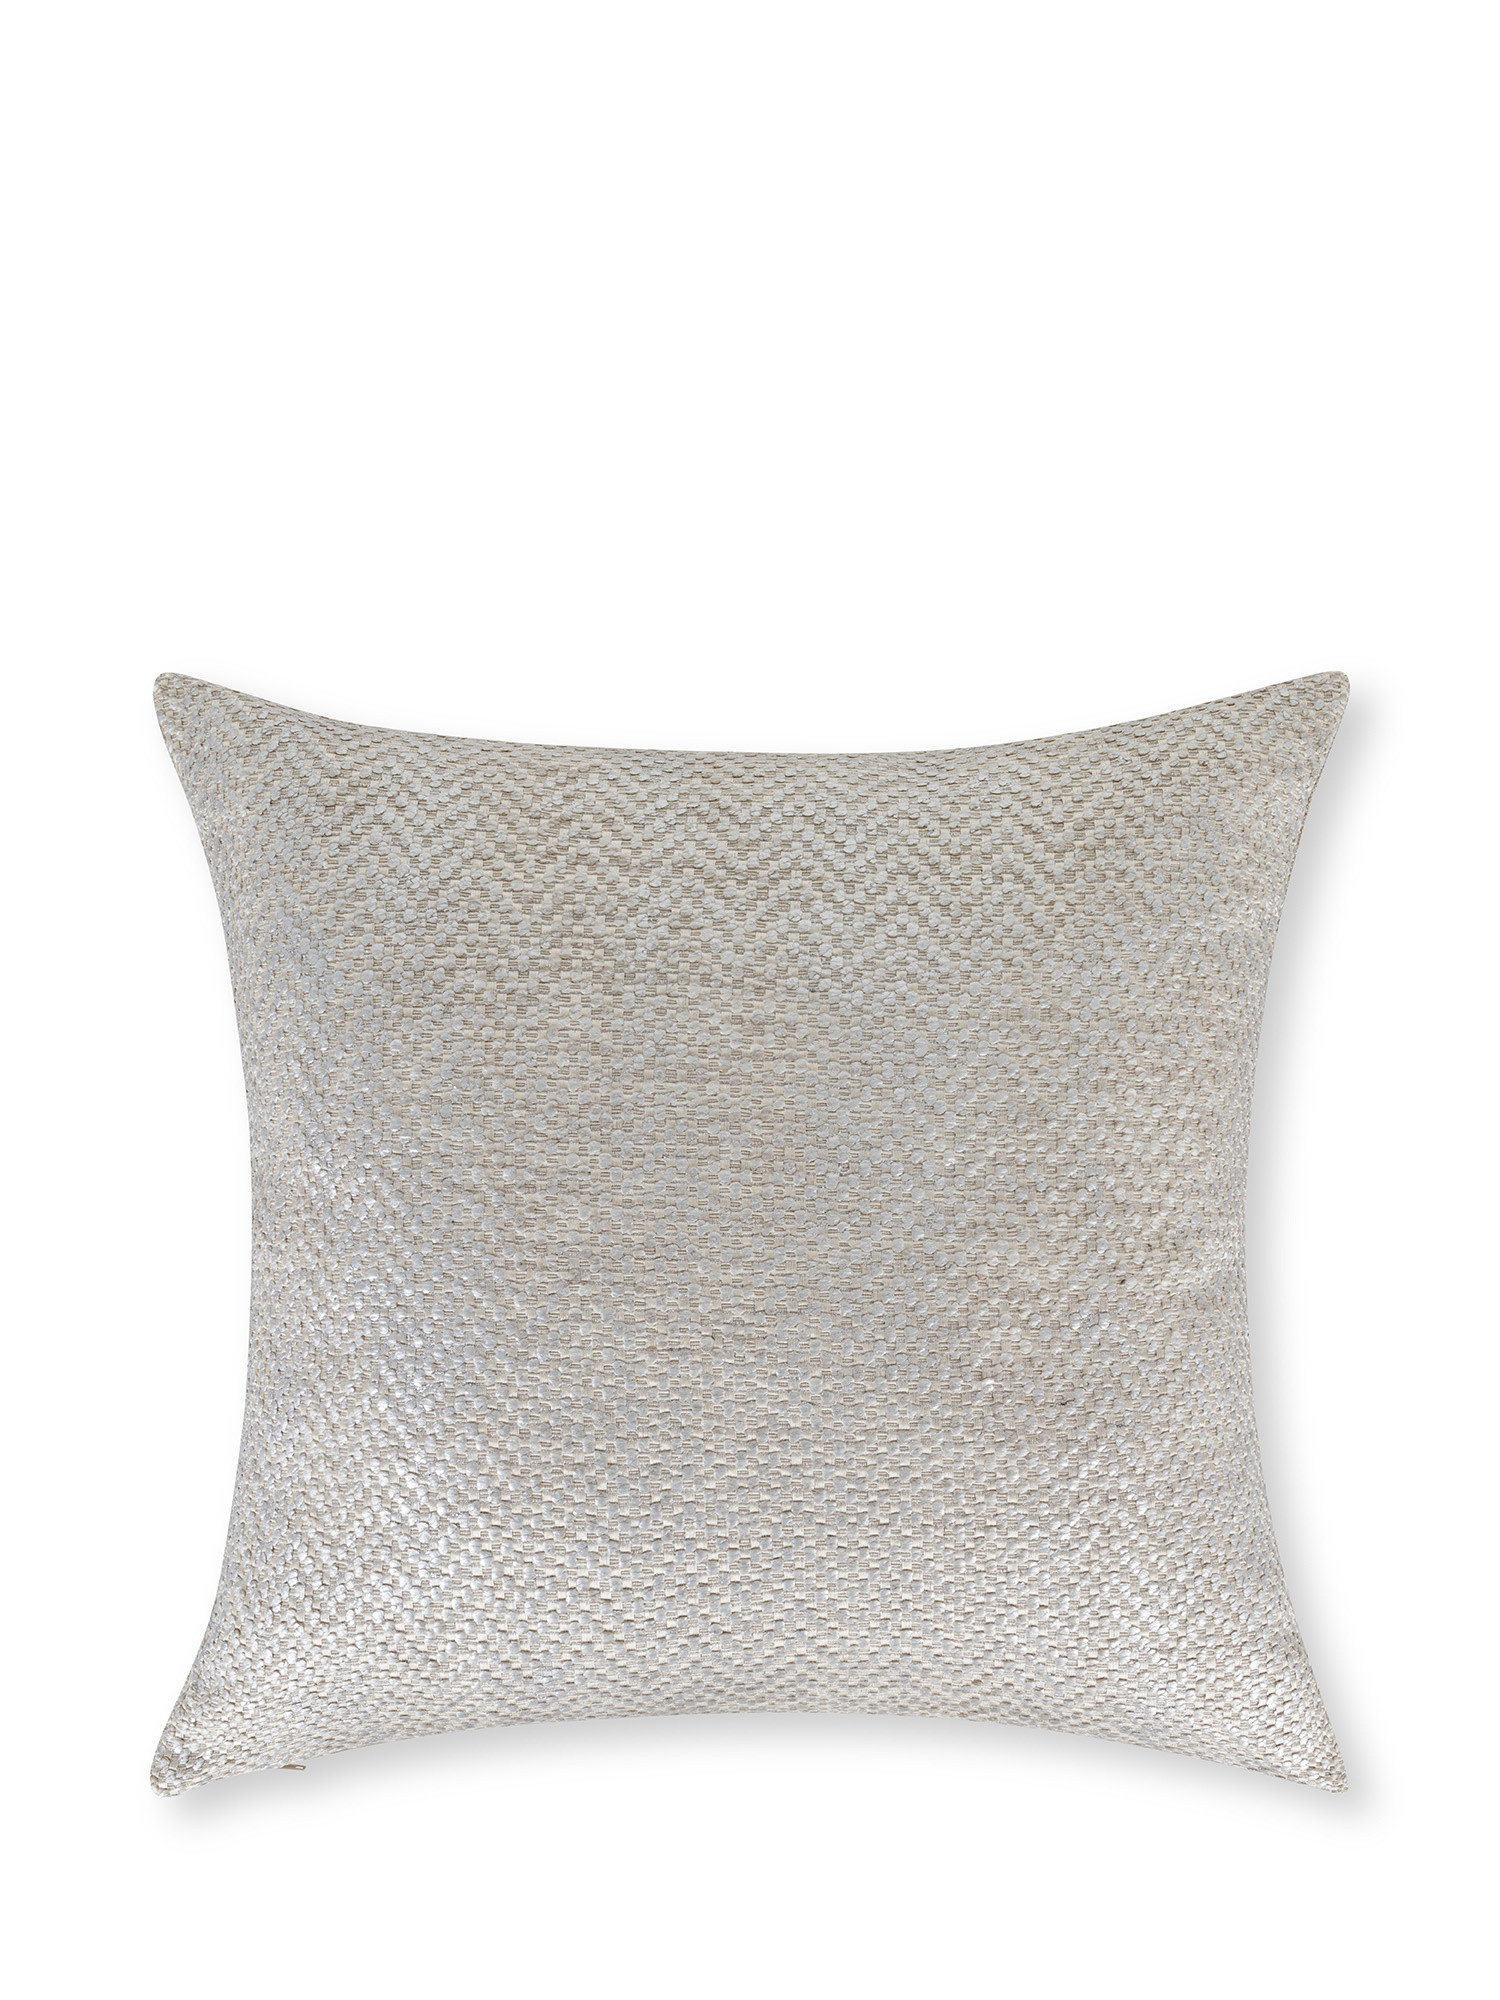 Cushion in jacquard fabric with silver relief pattern 45x45 cm, Silver Grey, large image number 0